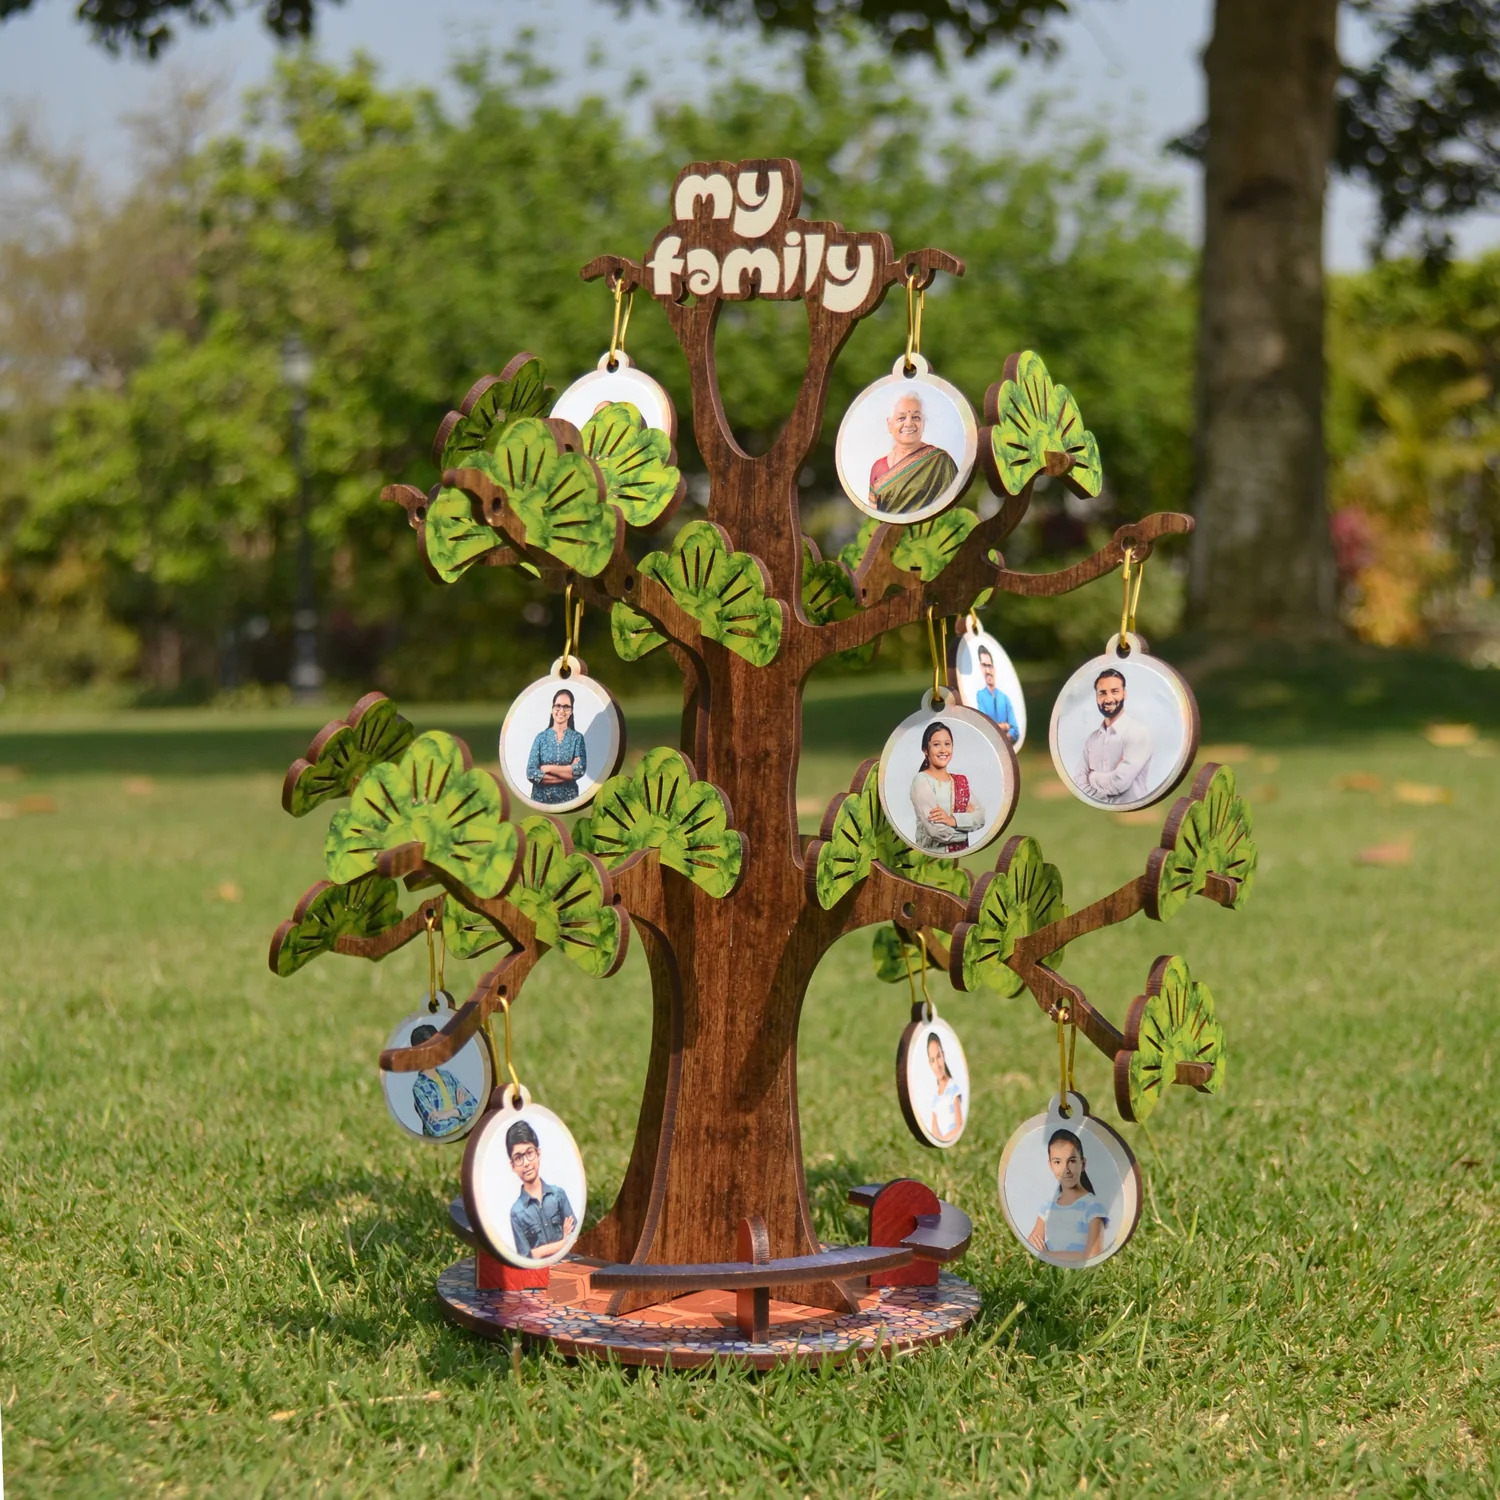 DIY Family Tree Games: A Creative Approach to Learning About Heritage and History